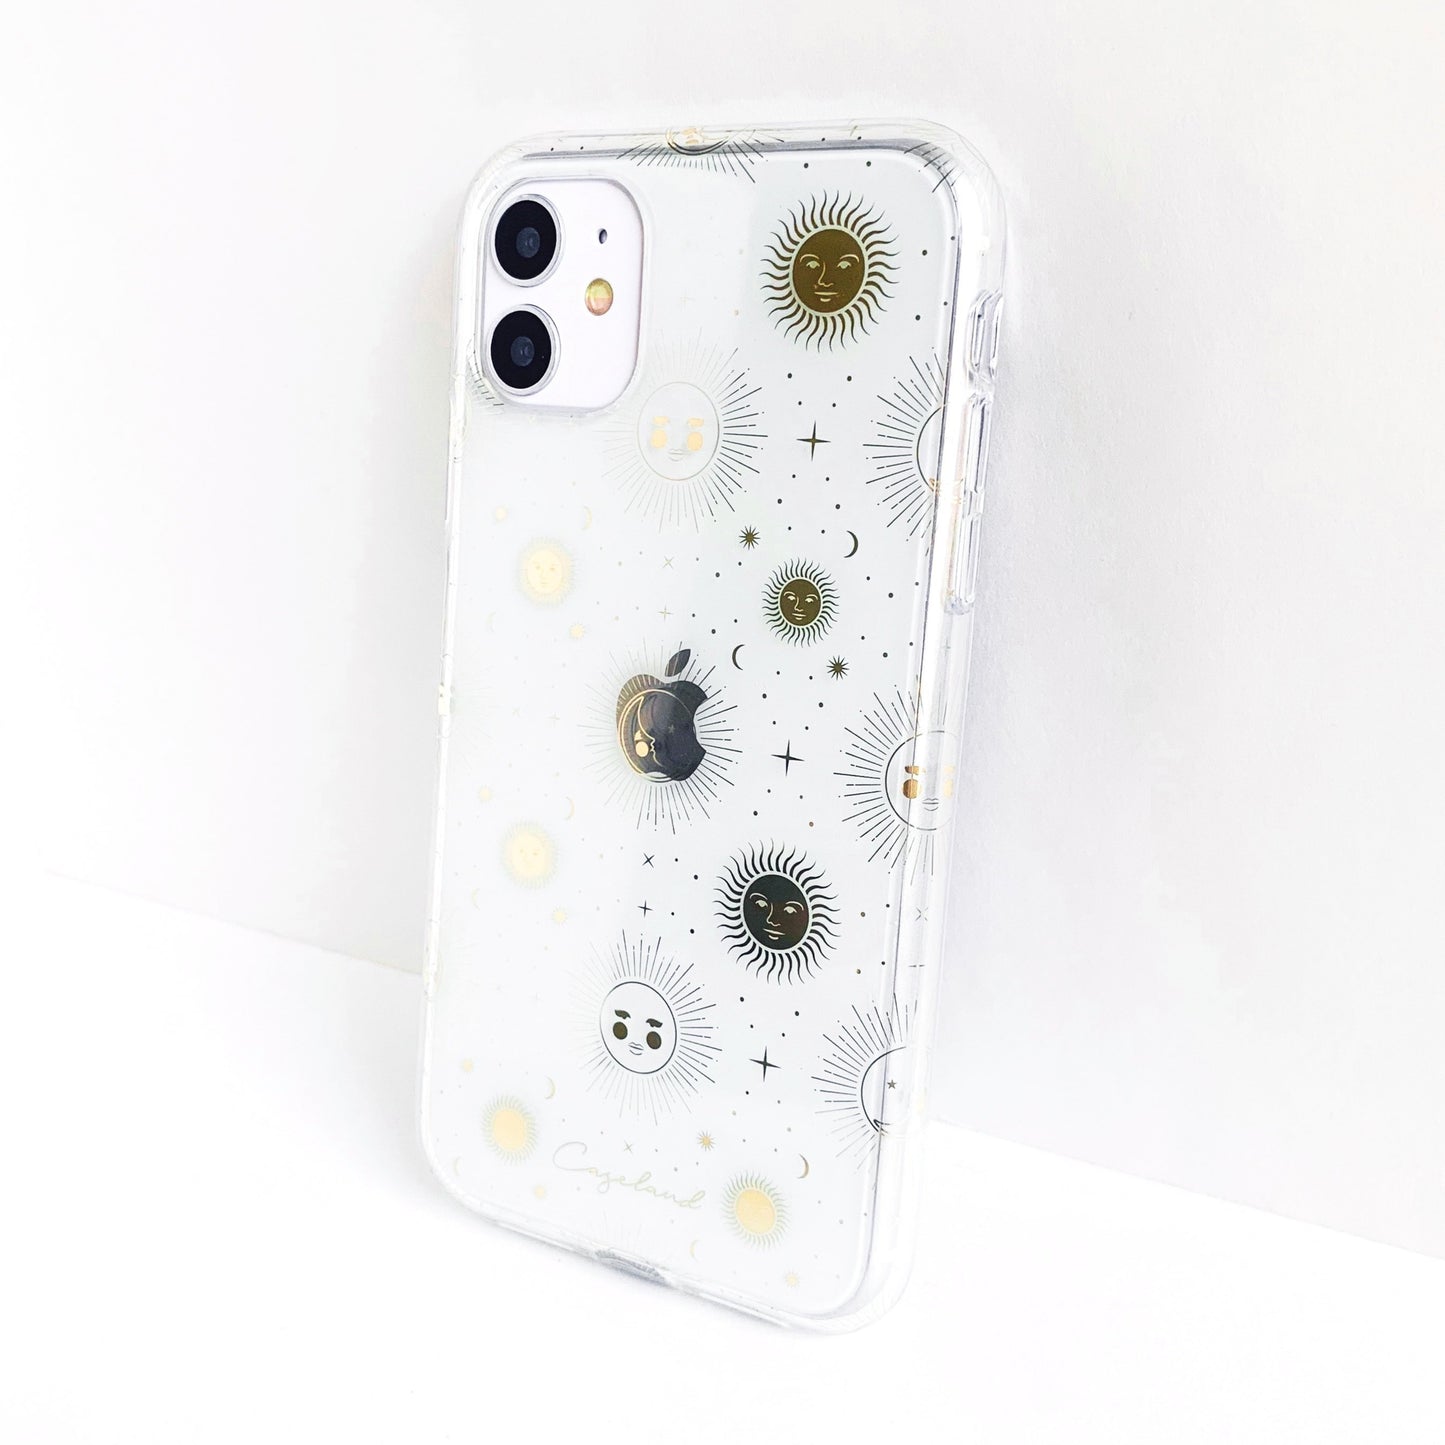 Astrology iPhone Case